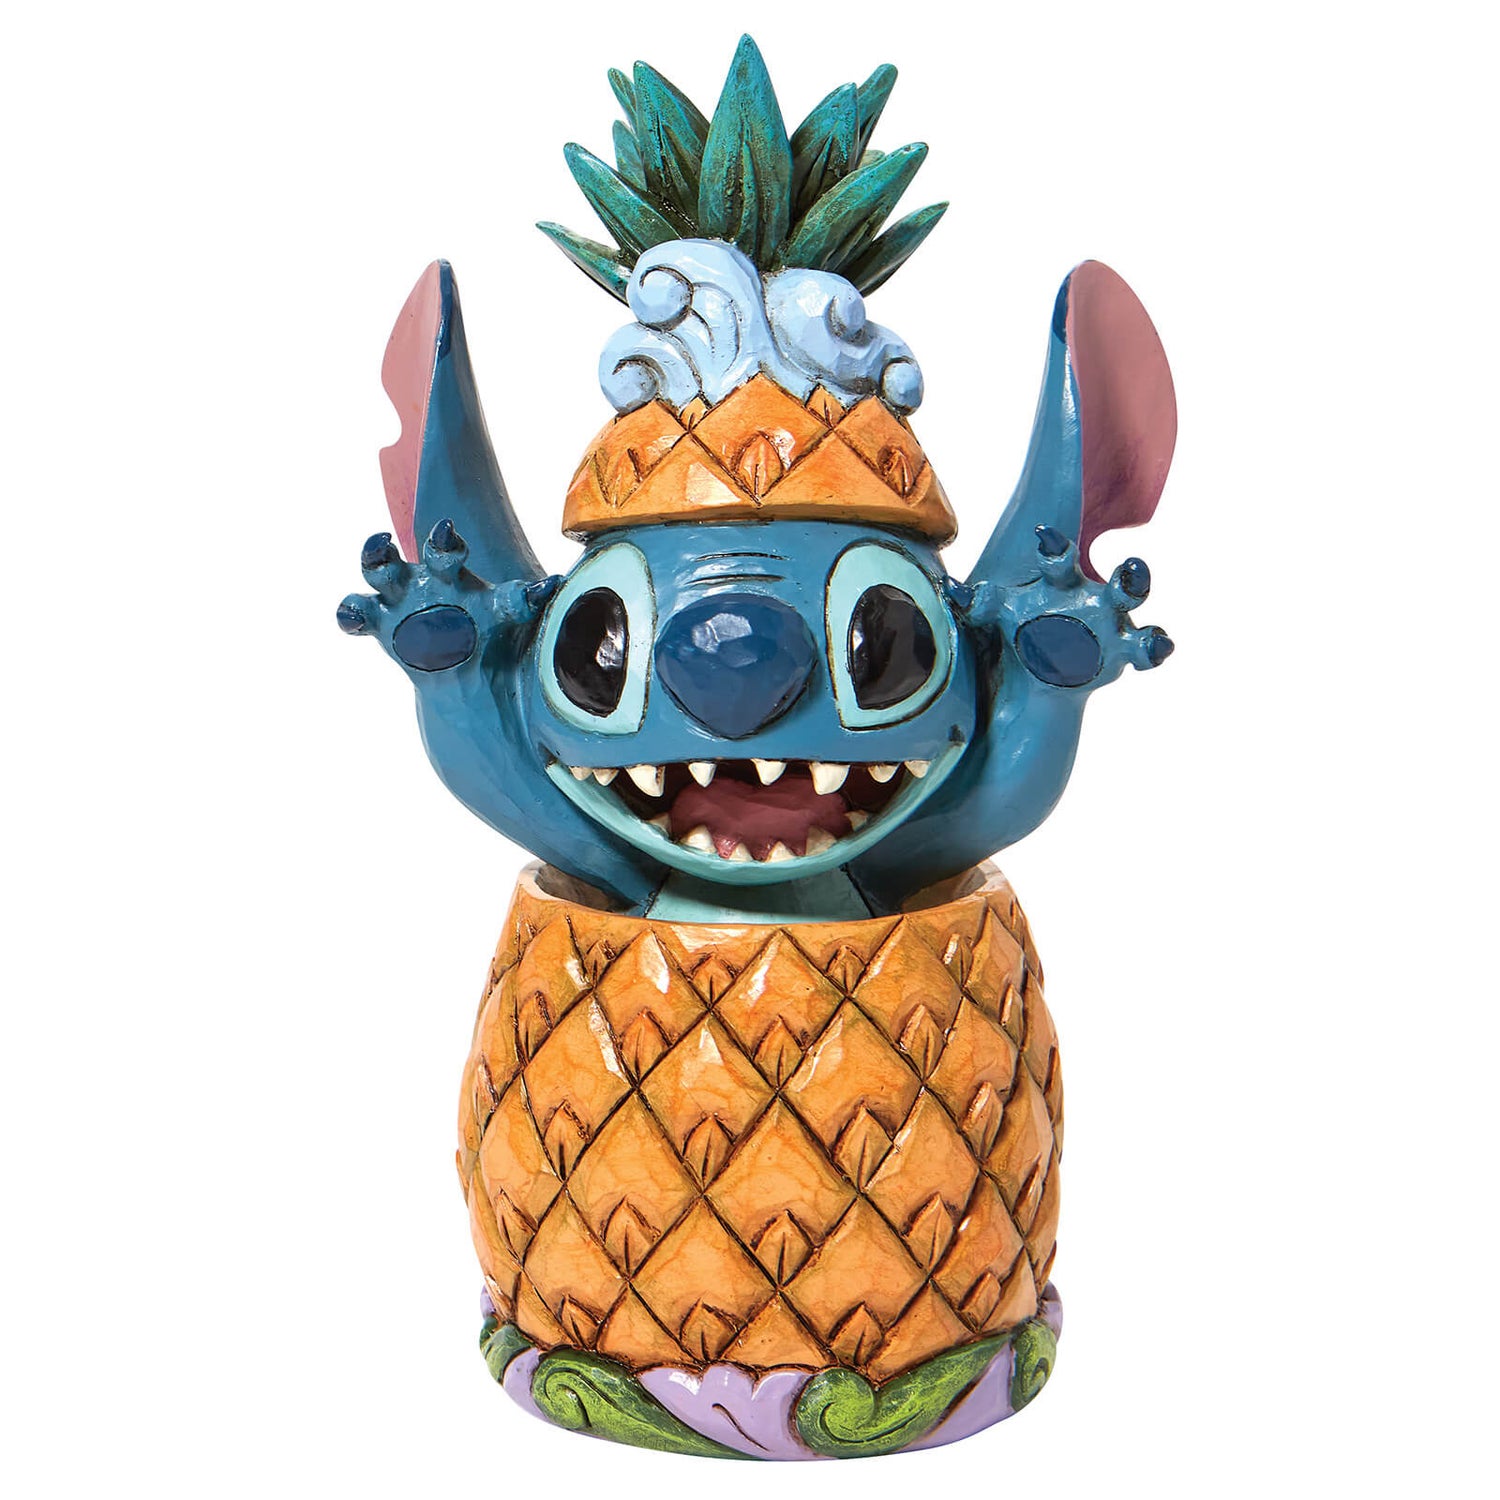 Disney Traditions Stitch In A Pineapple Figurine